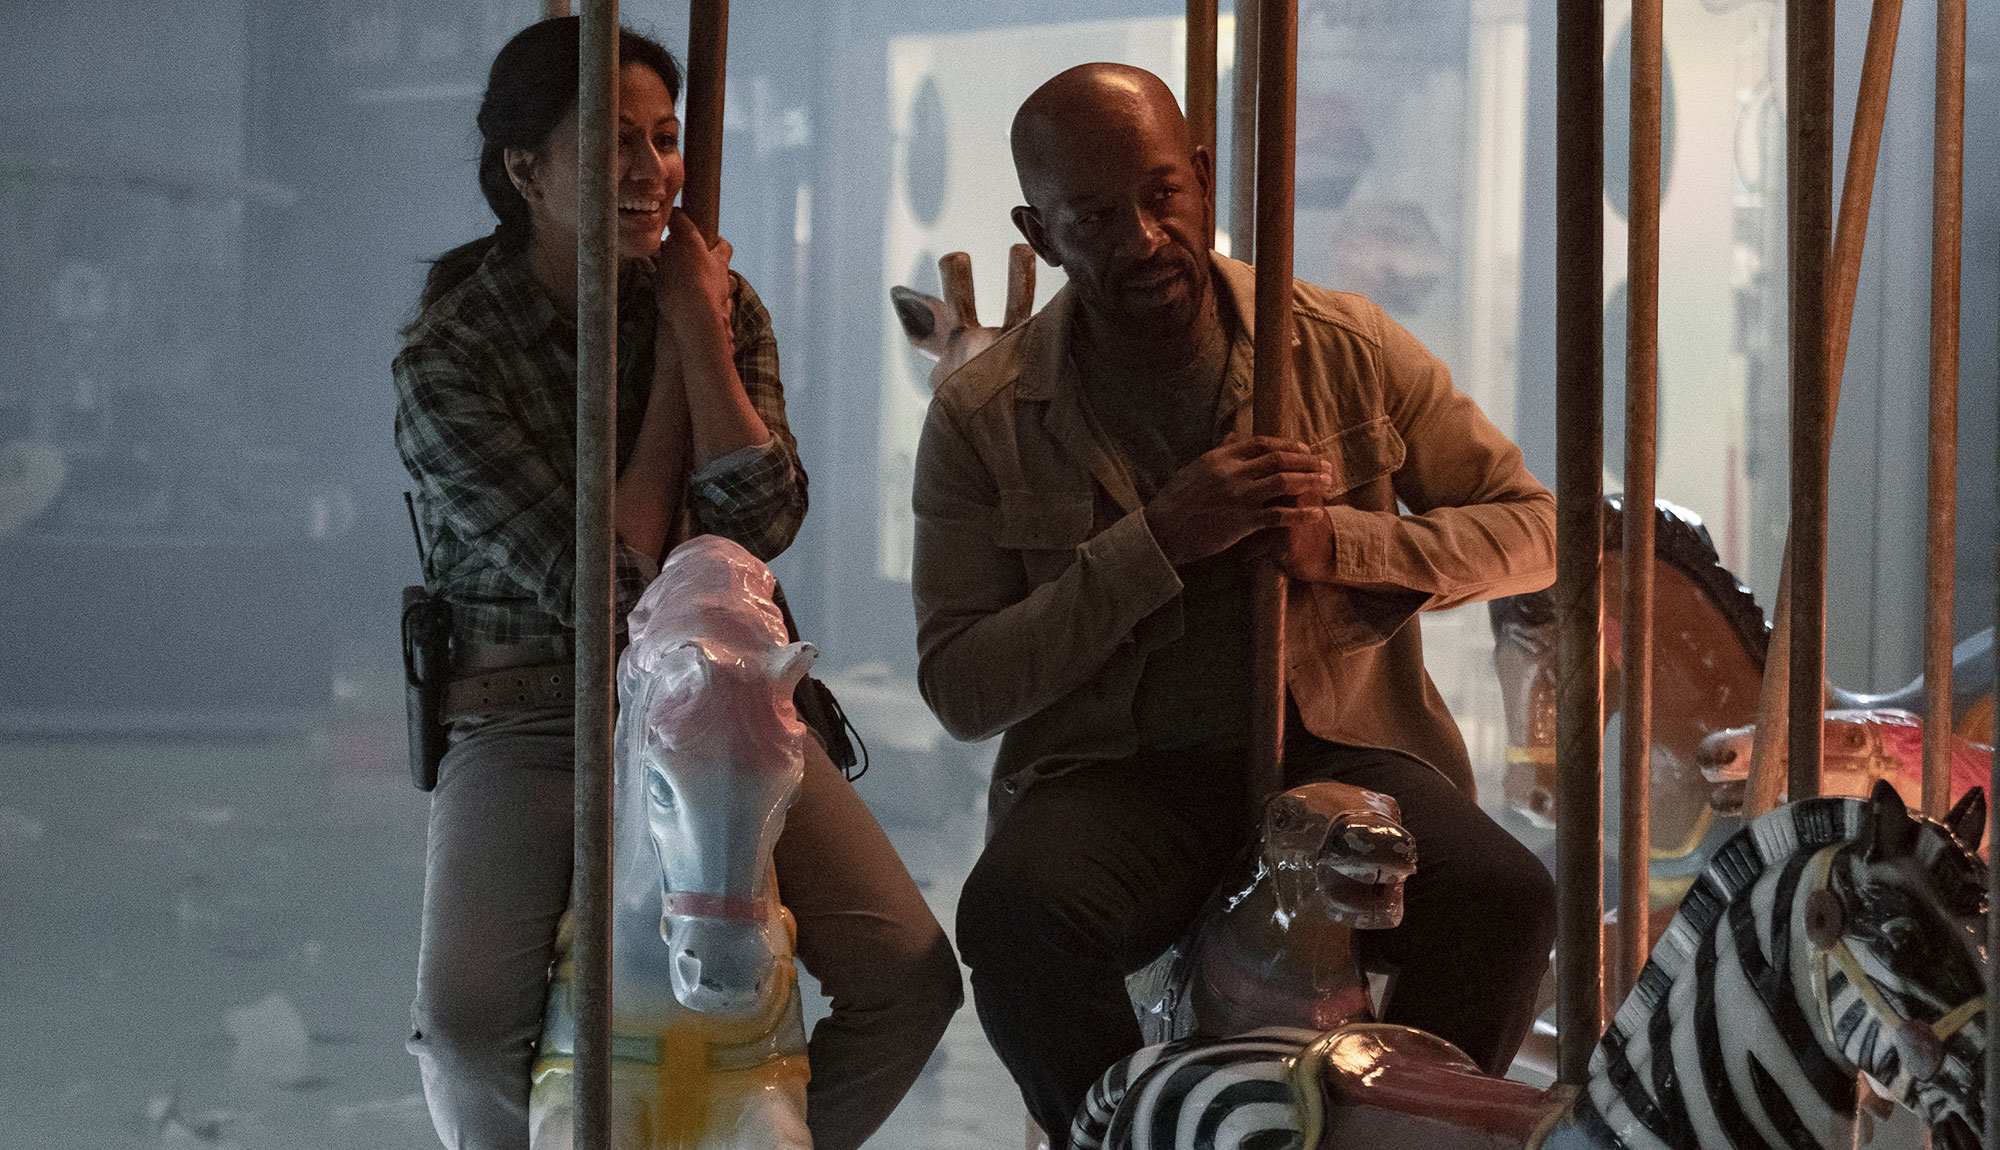 The Best Images From Fear the Walking Dead Episode 510